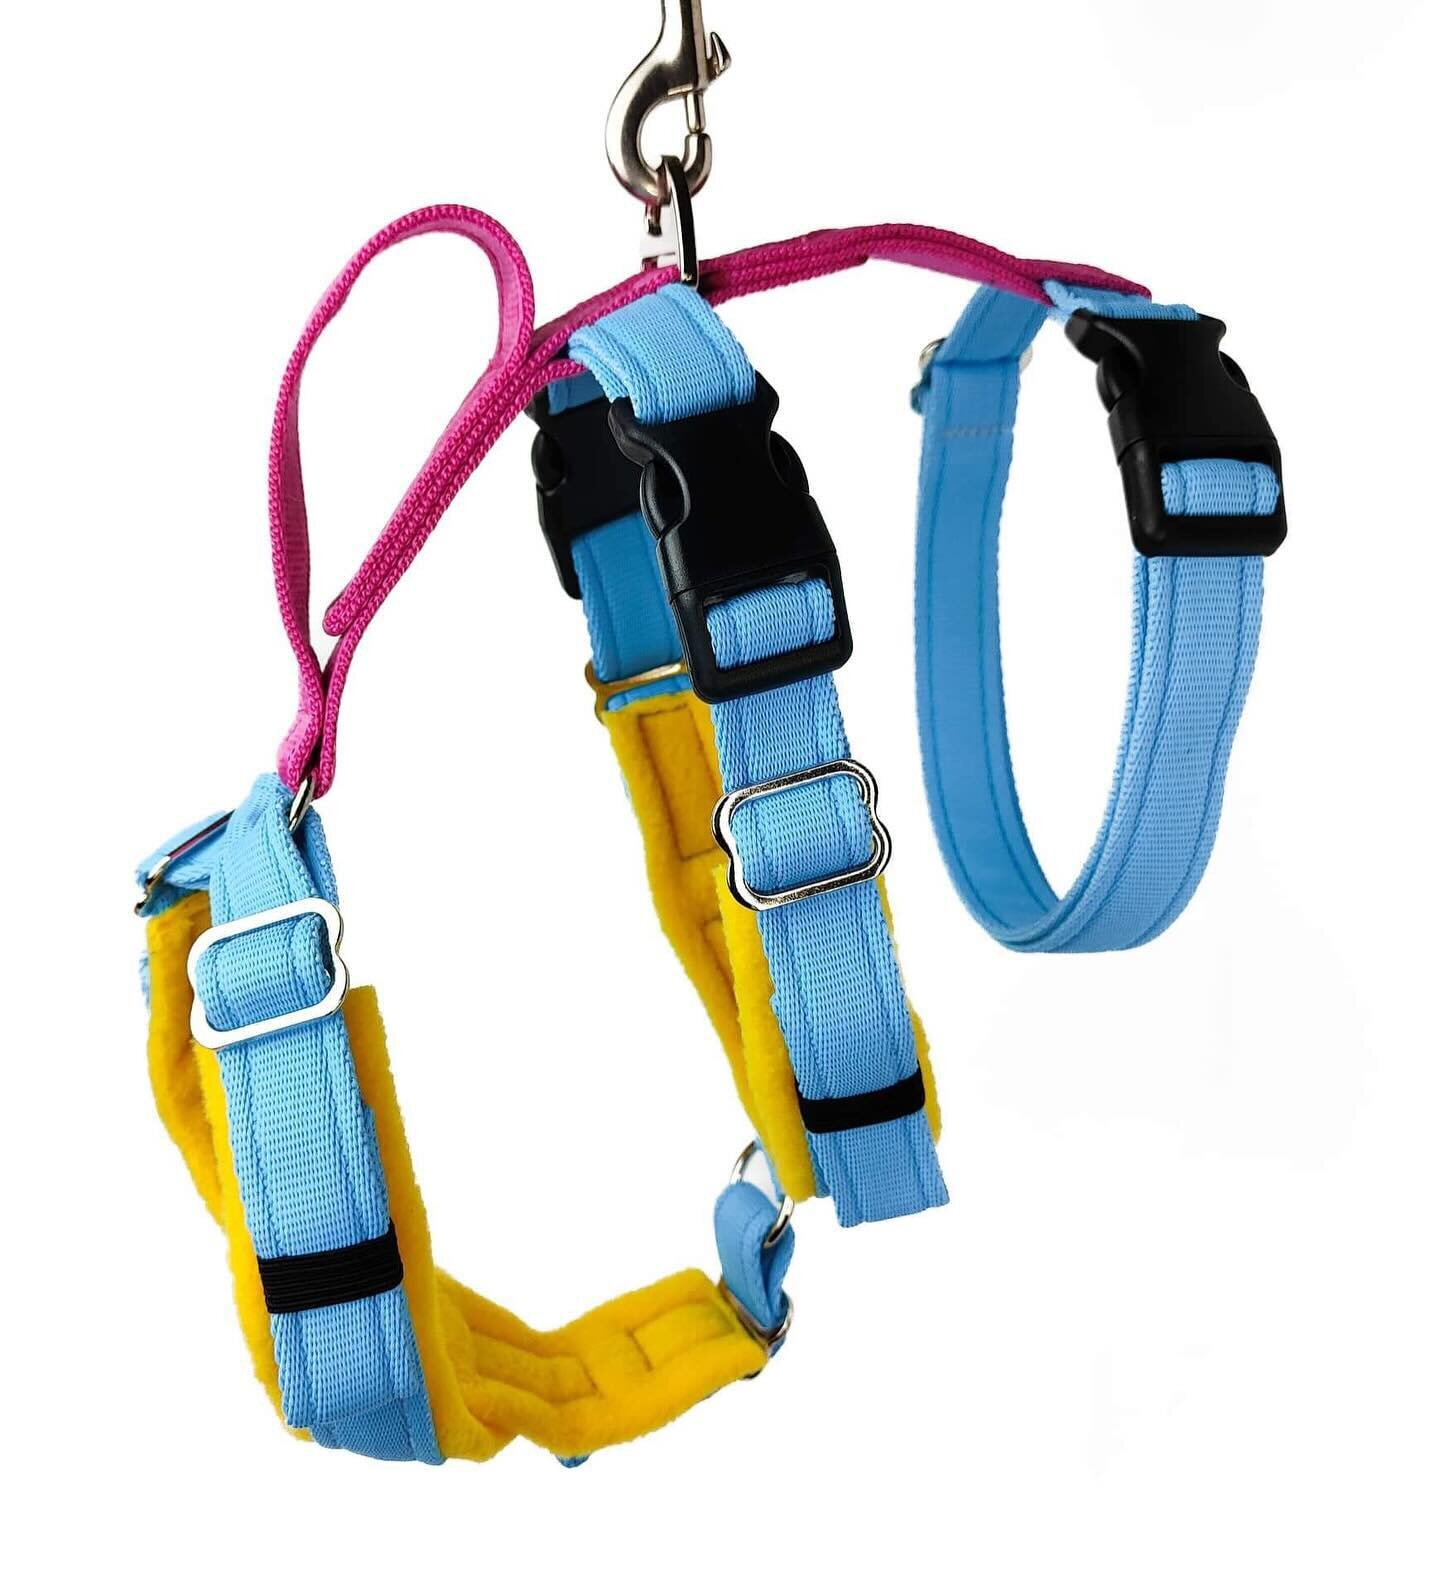 You all love our HFP Charity block colour collars from @houndheartcollars so much that we decided we needed a harness to match! So we tasked @indidog_uk with creating this beauty. A fully adjustable &lsquo;Houdini&rsquo; harness in our signature blue